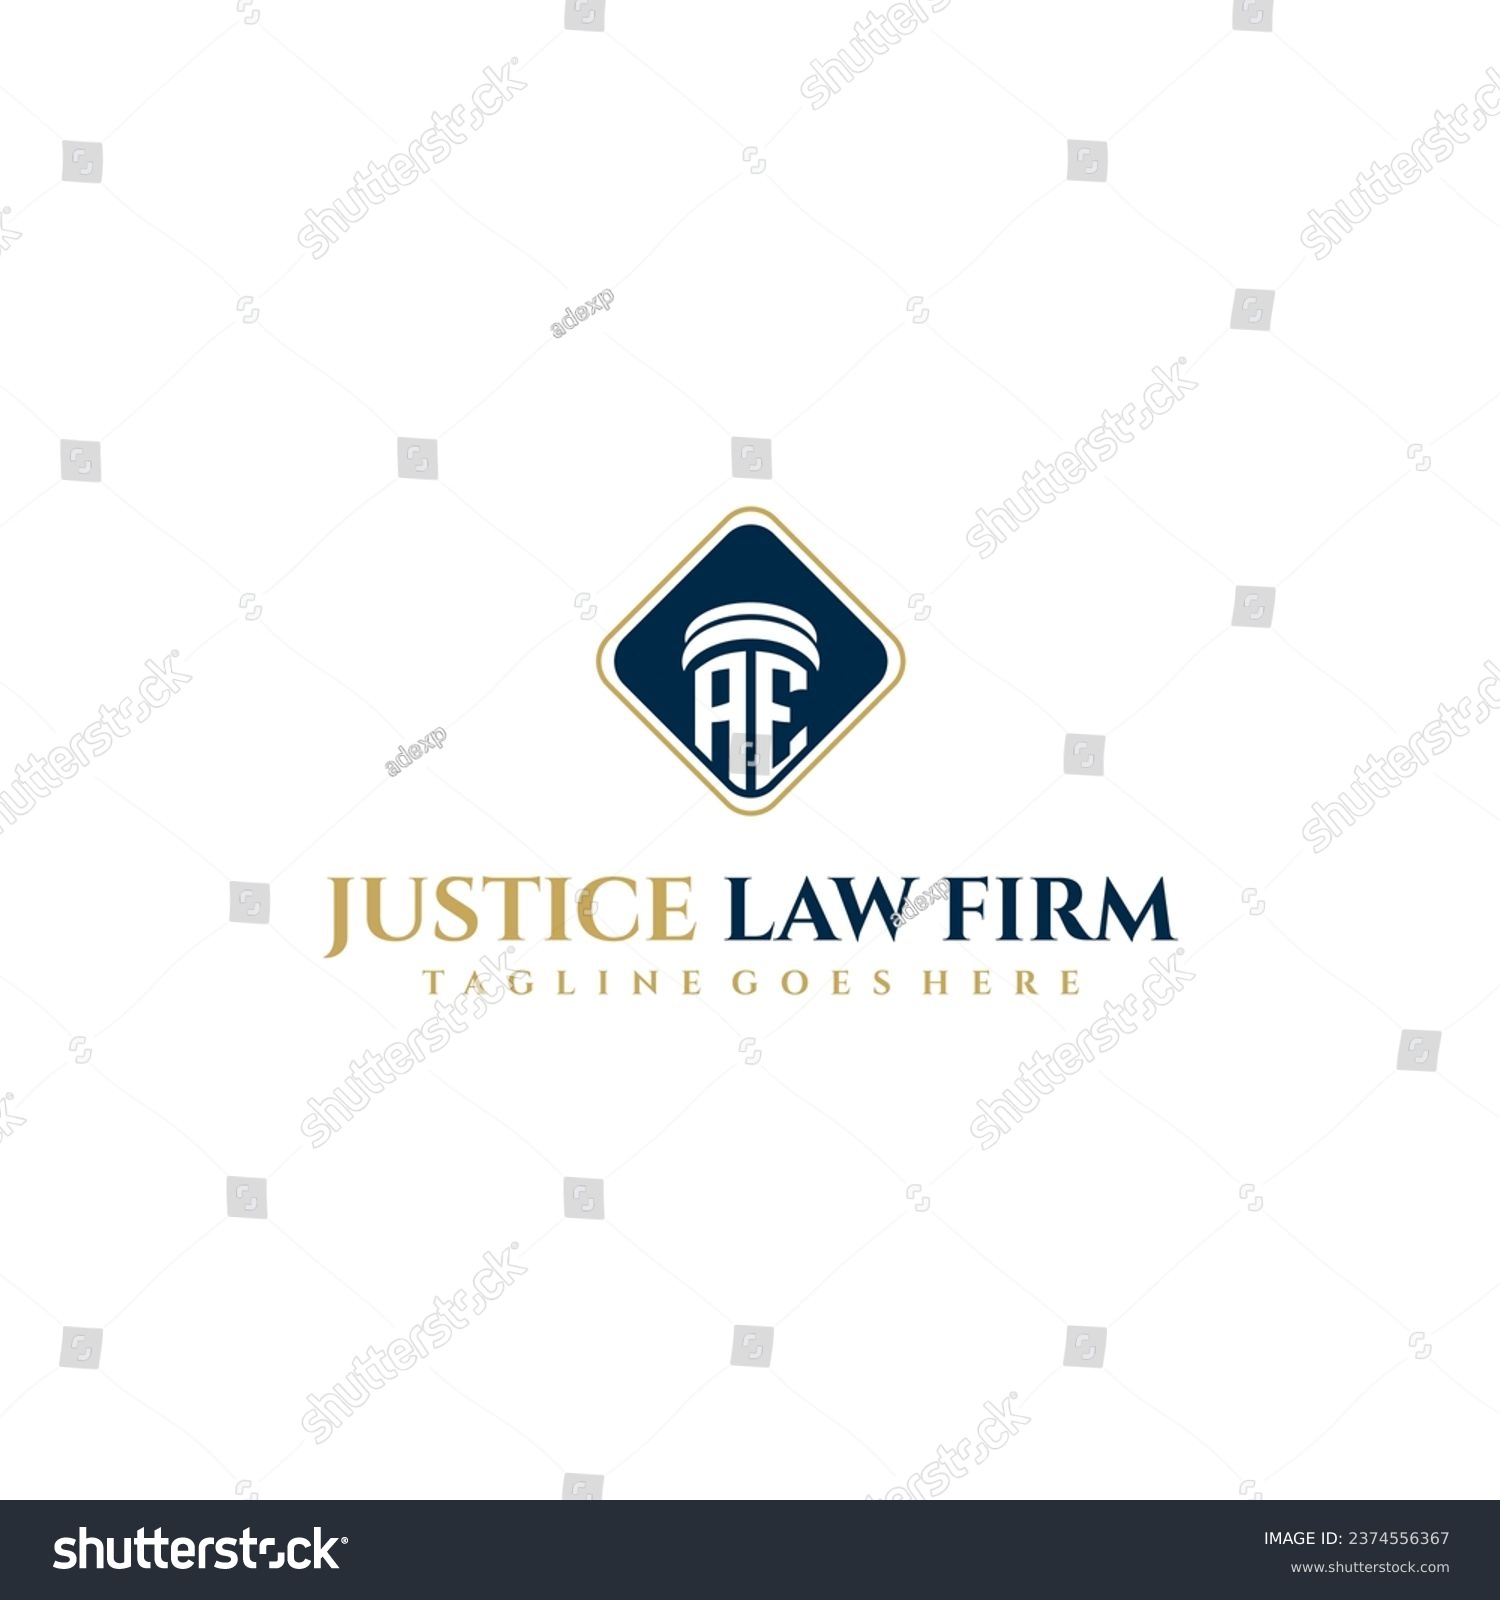 SVG of AE initial monogram for lawfirm logo ideas with creative polygon style design svg